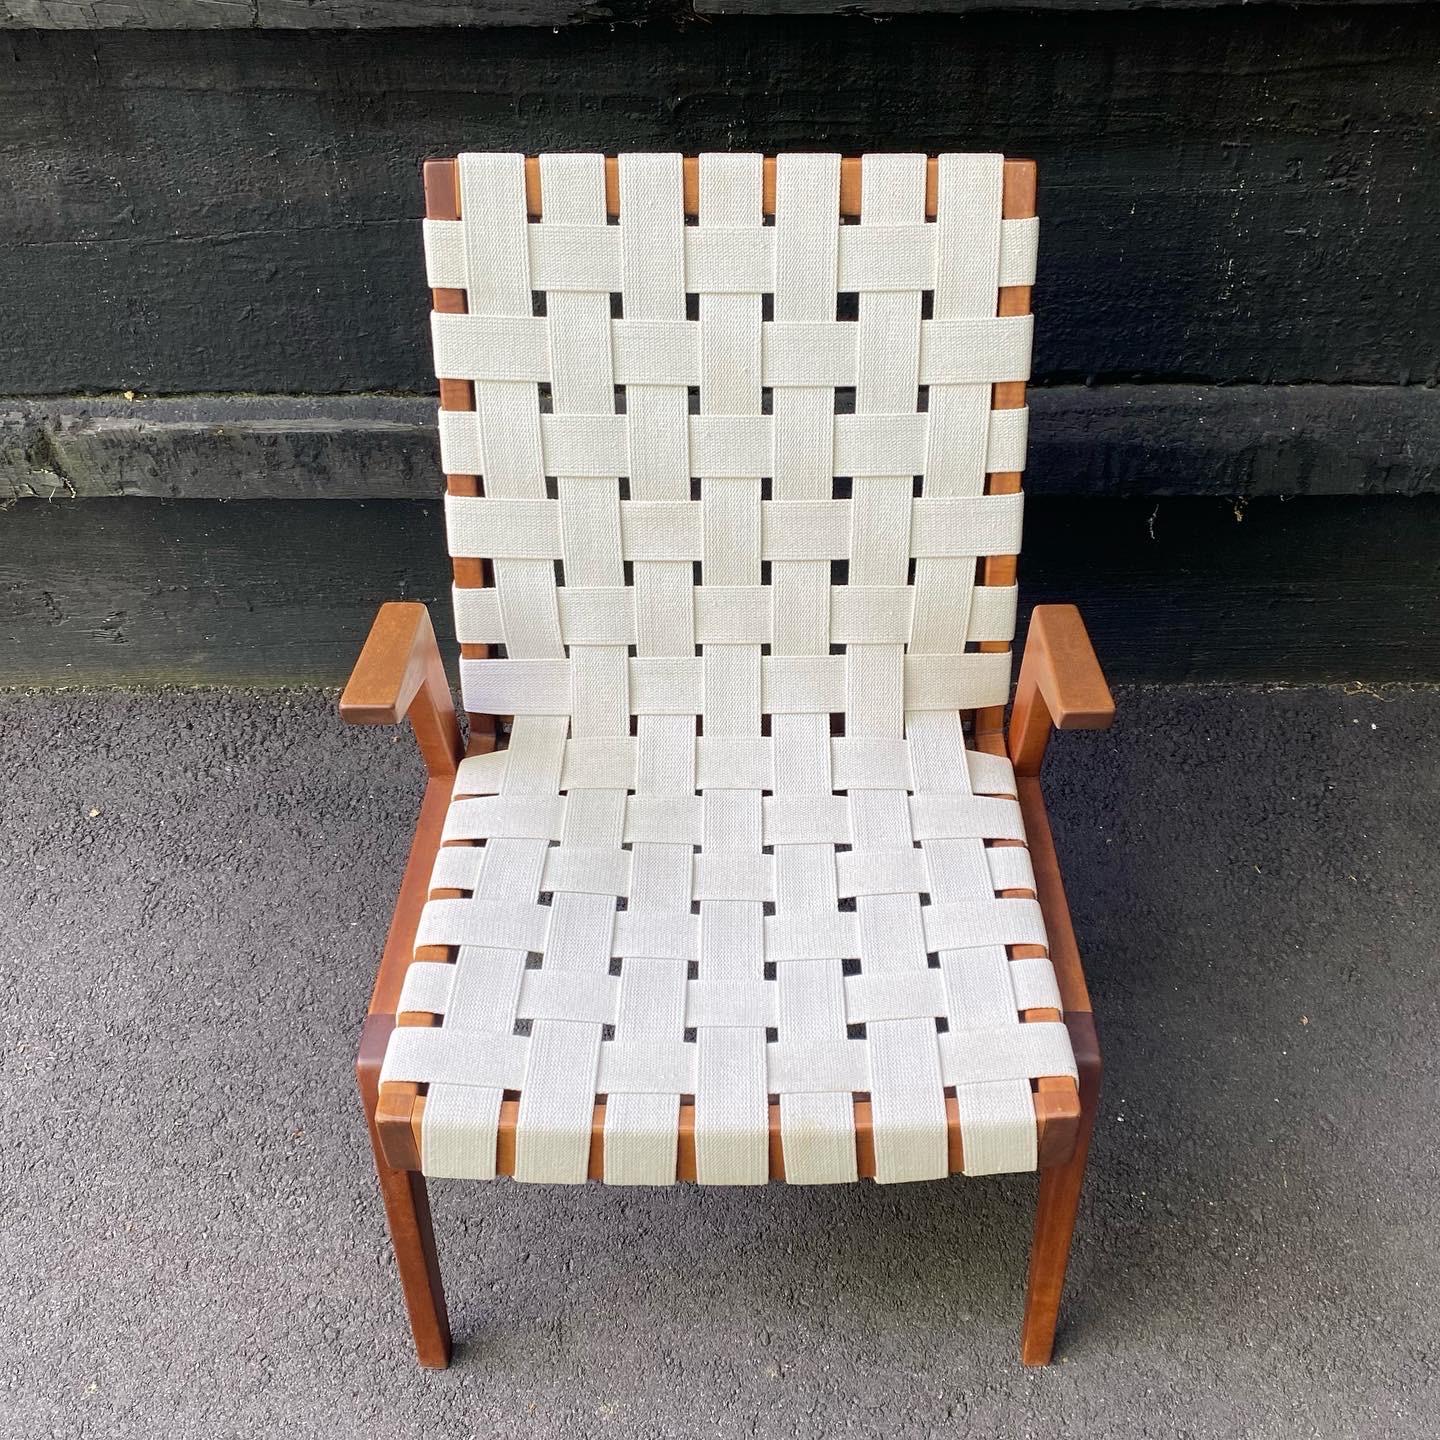 From the estate of Arden Riddle, this solid cherry wood lounge chair is covered in a thick white woven webbing, which was redone in the last 5 years. There are some light imperfections from age and use to the webbing, but overall it presents well.